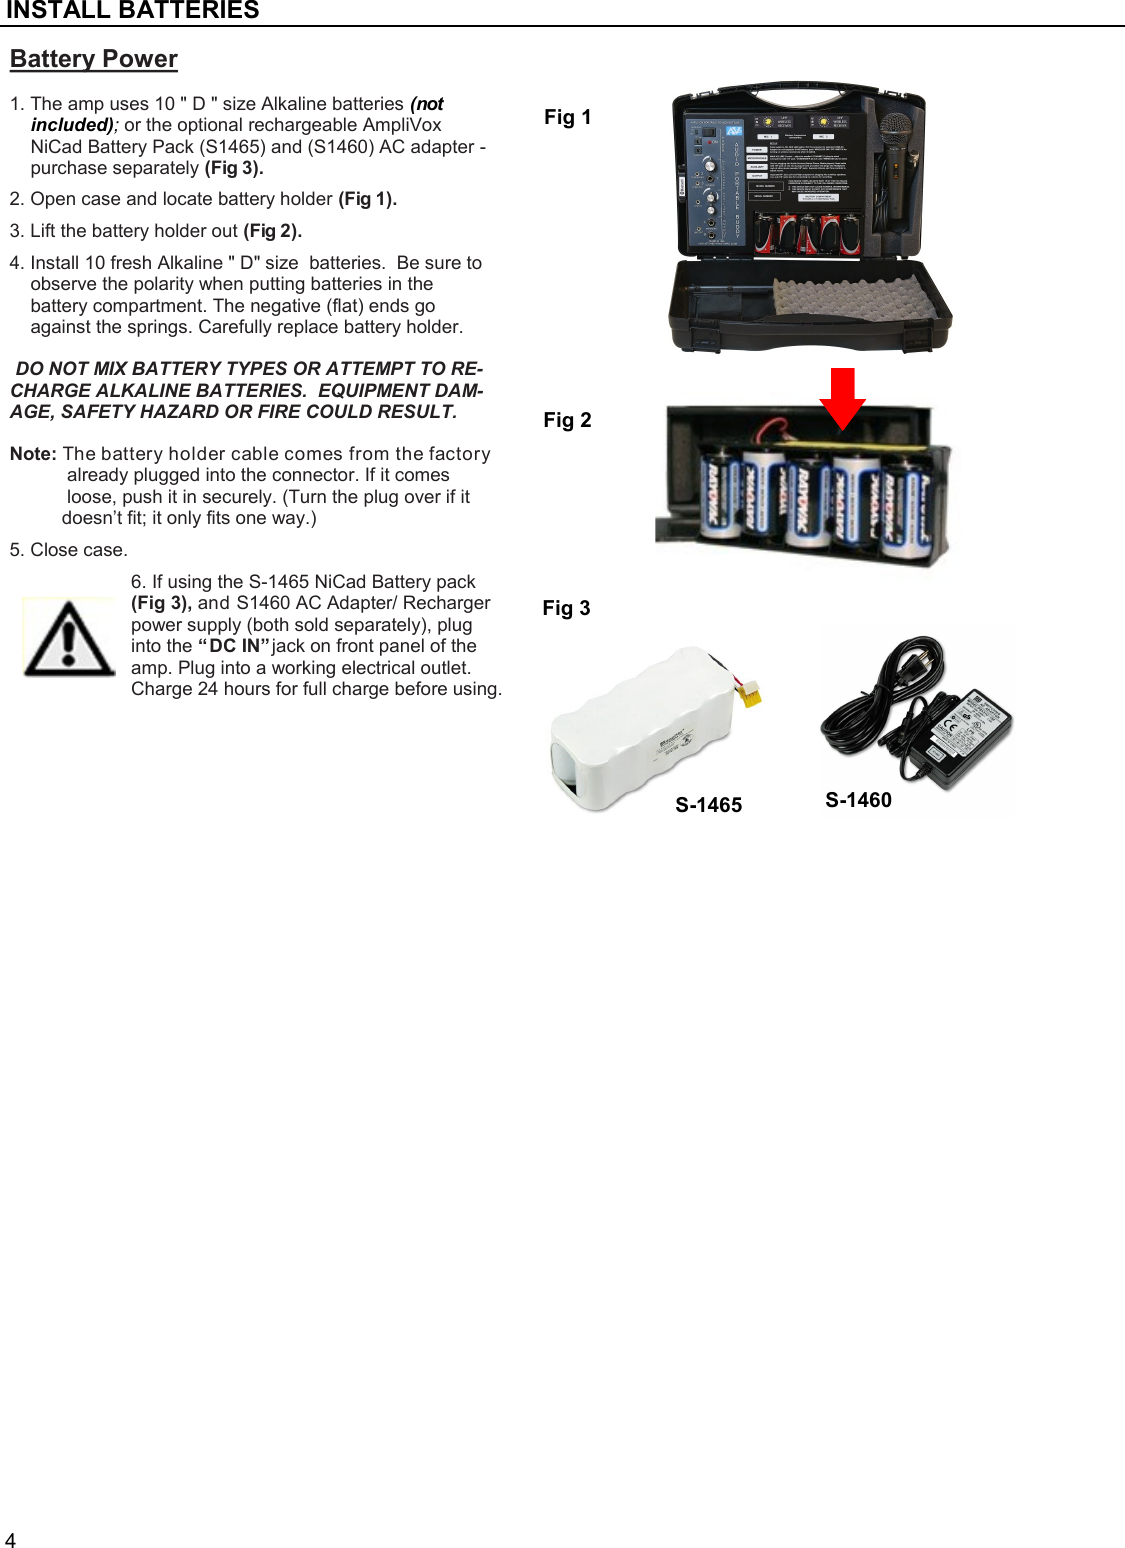 Page 4 of 7 - User Manual Pabddyw